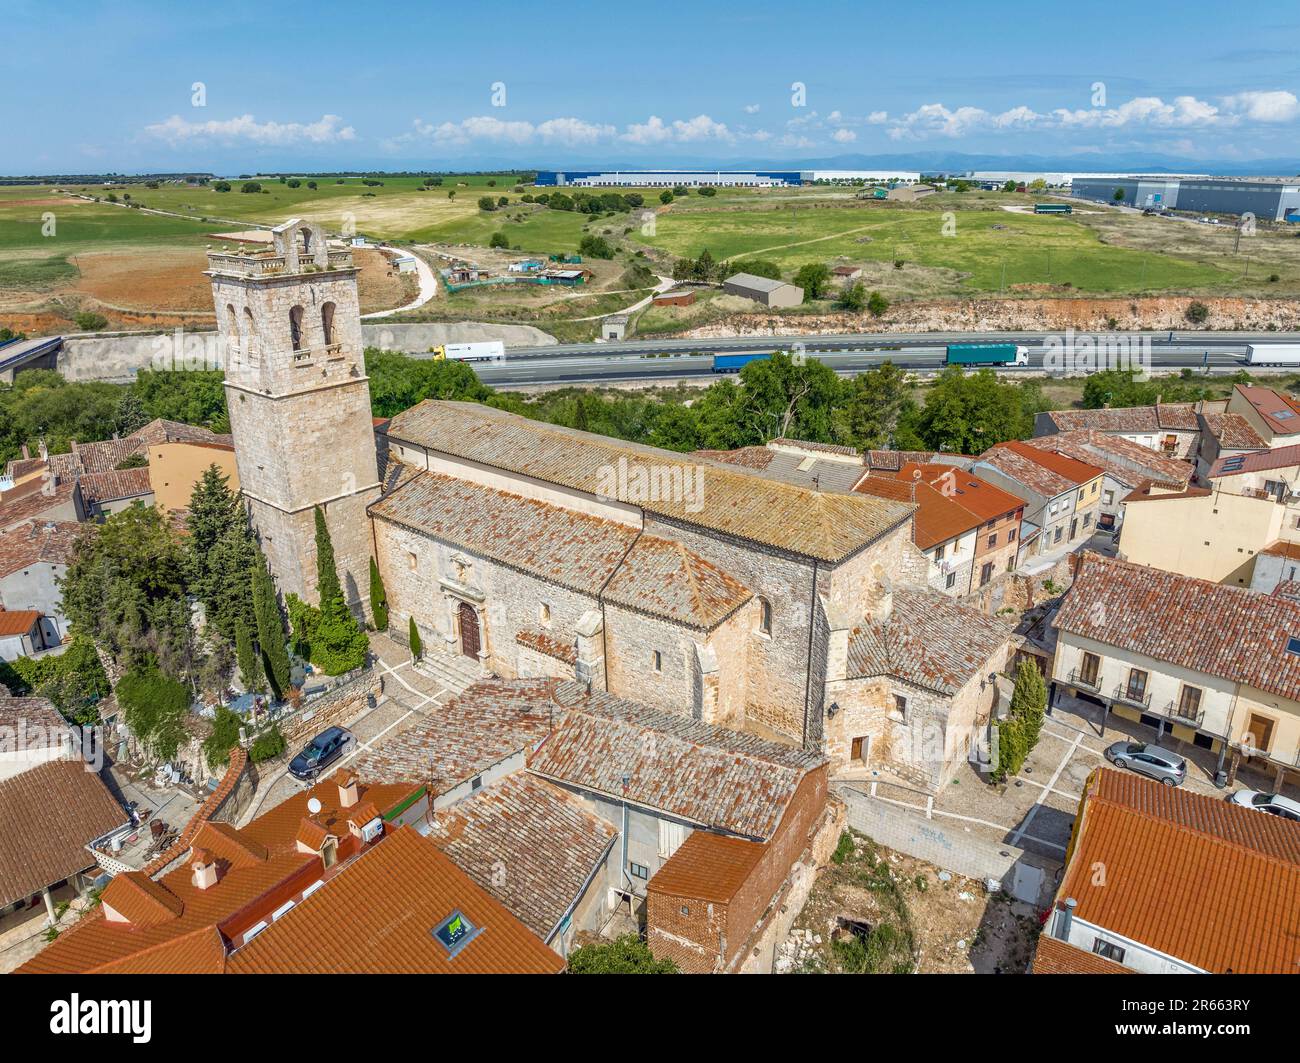 Church of Our Lady of the Assumption in Torija municipality located in the province of Guadalajara, Castilla-La Mancha, Spain. Stock Photo